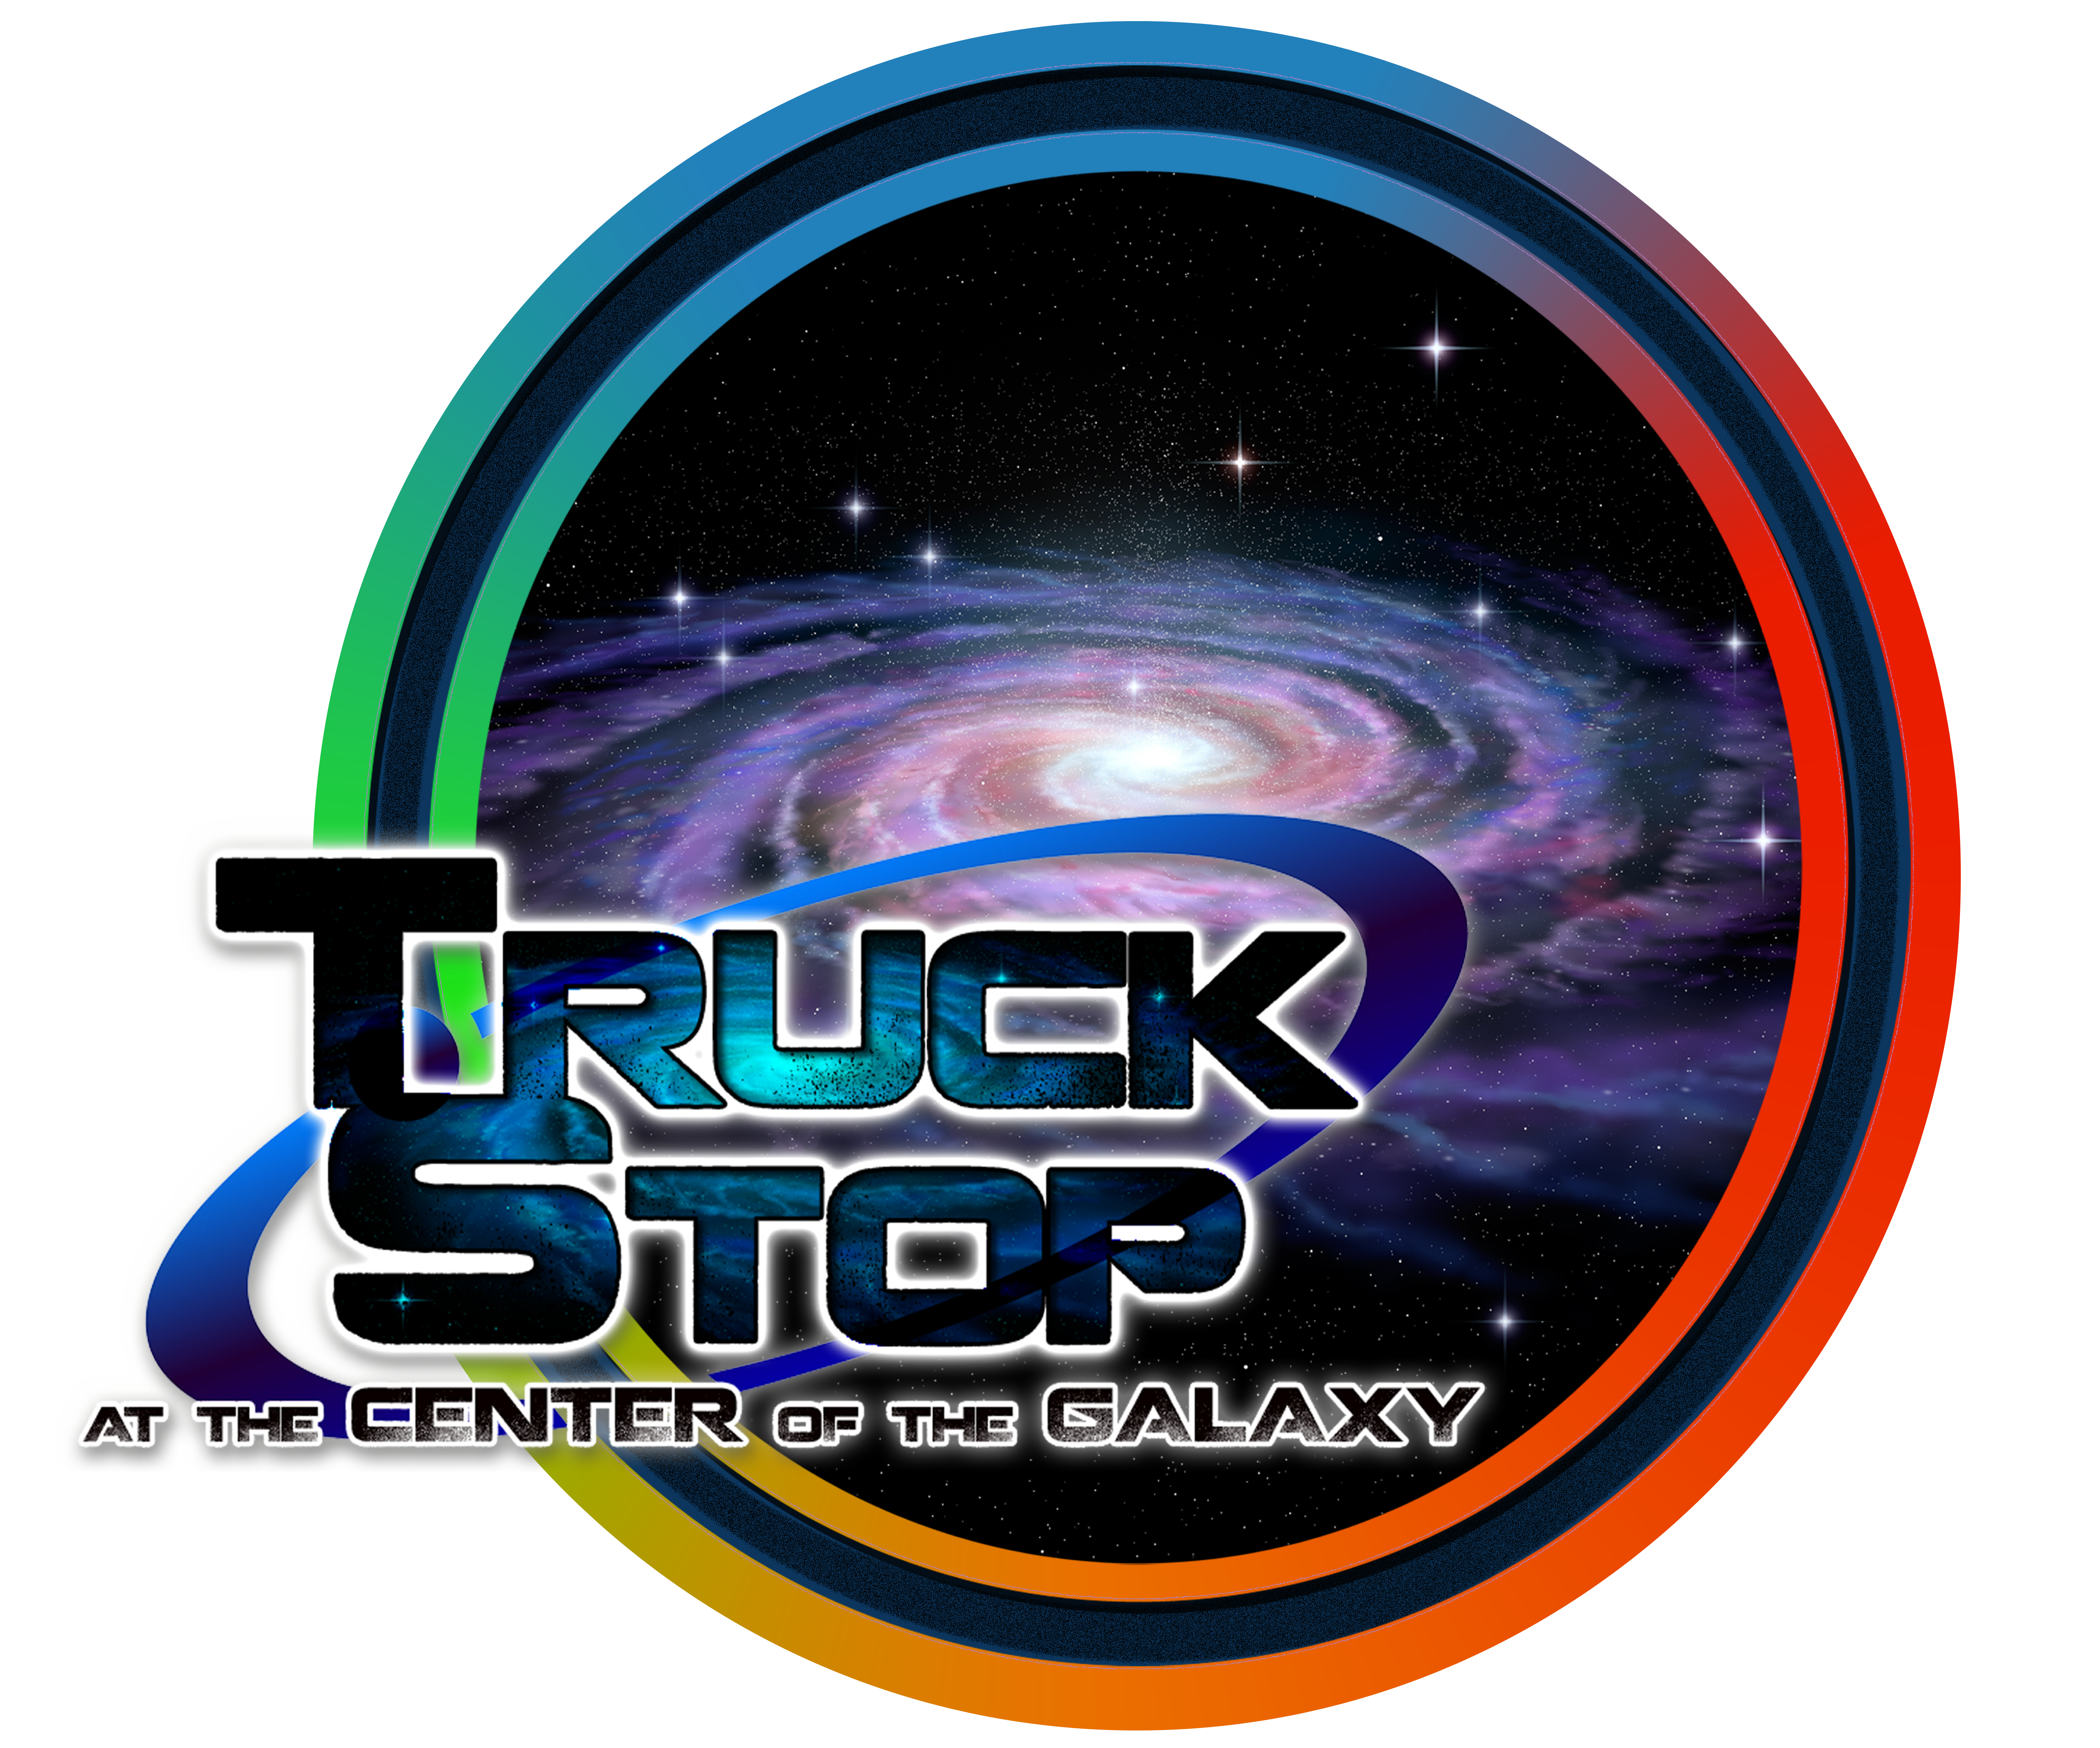 Logo for Truck Stop at the center of the galaxy: a rainbw rim with an image of the Milky Way in the center.